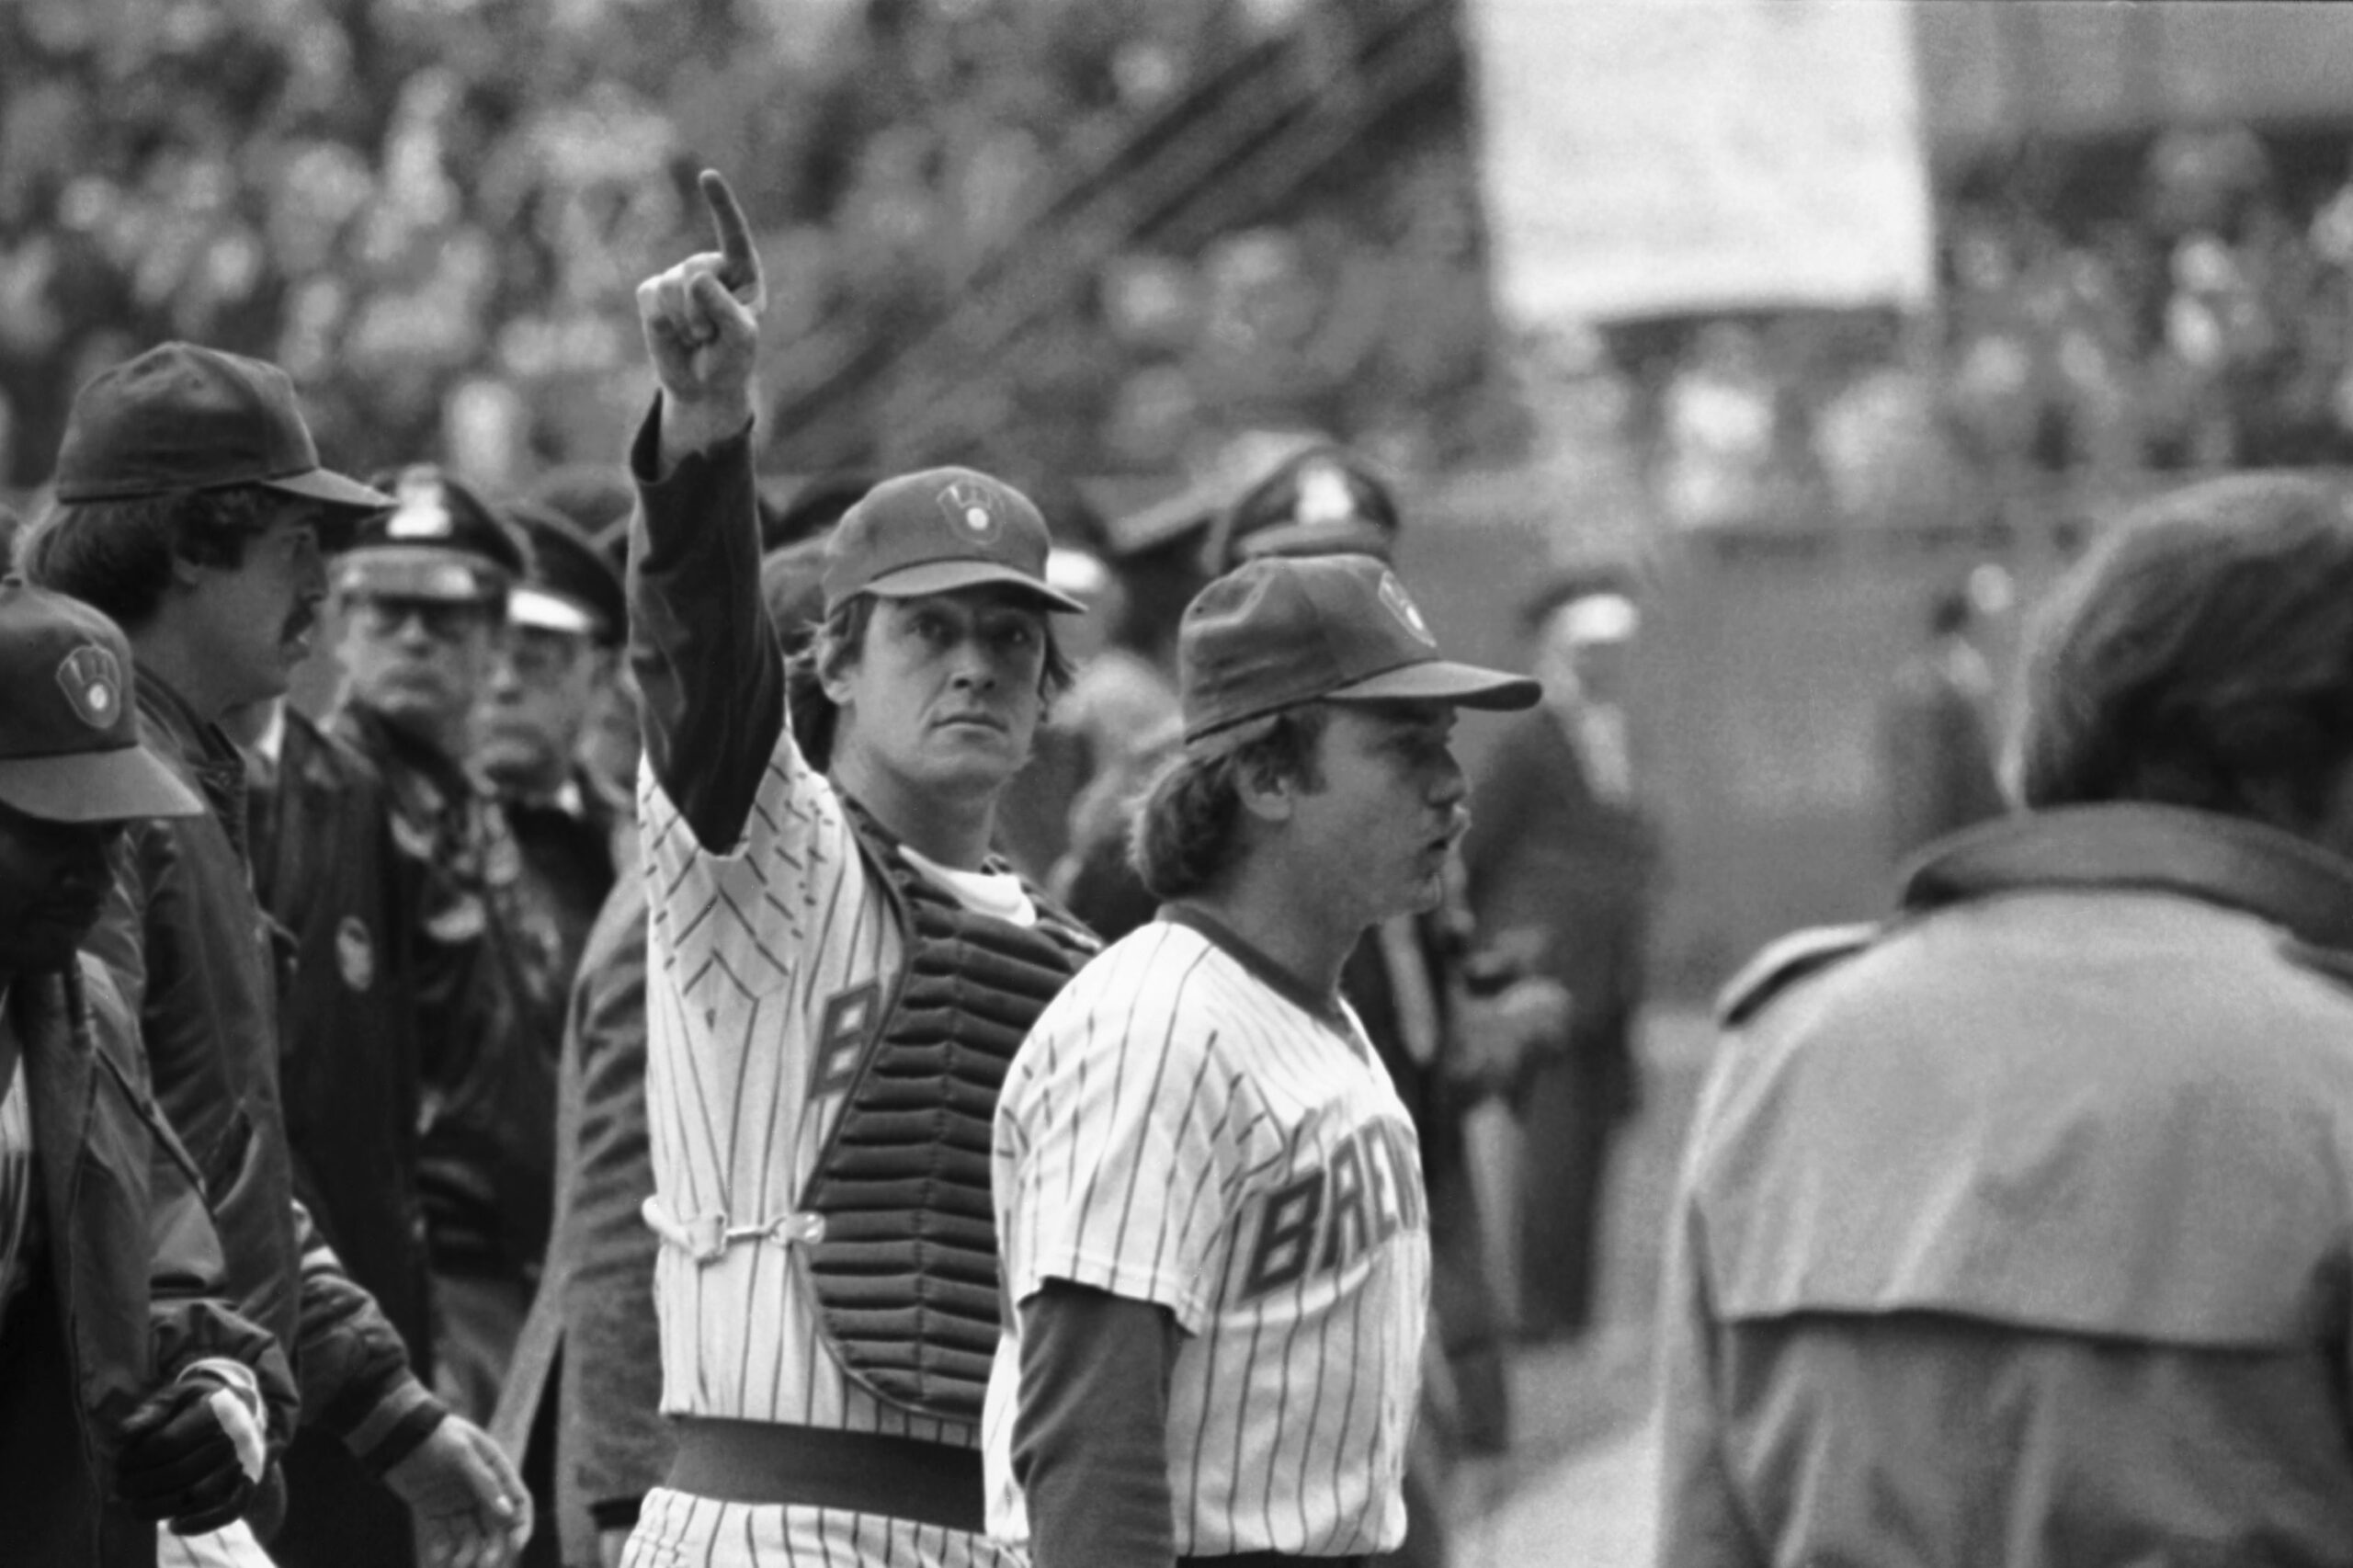 Ted Simmons of the Milwaukee Brewers points to the crowd after winning an 1982 World Series game